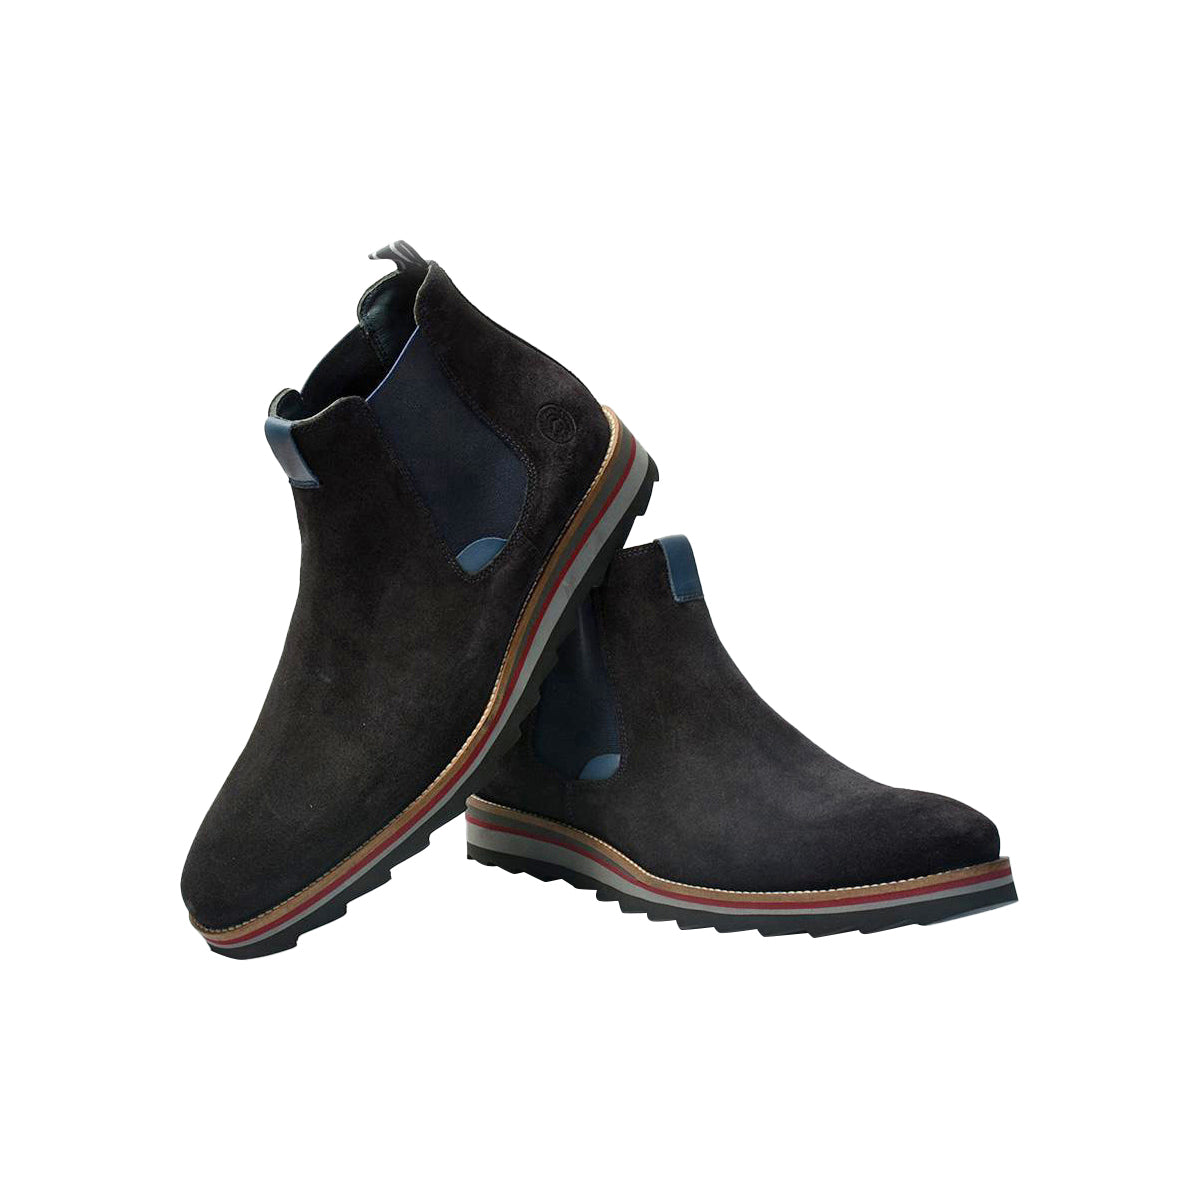 Men Suede Leather Casual Chelsea Boots ǀ JAMES 10010(5-B)